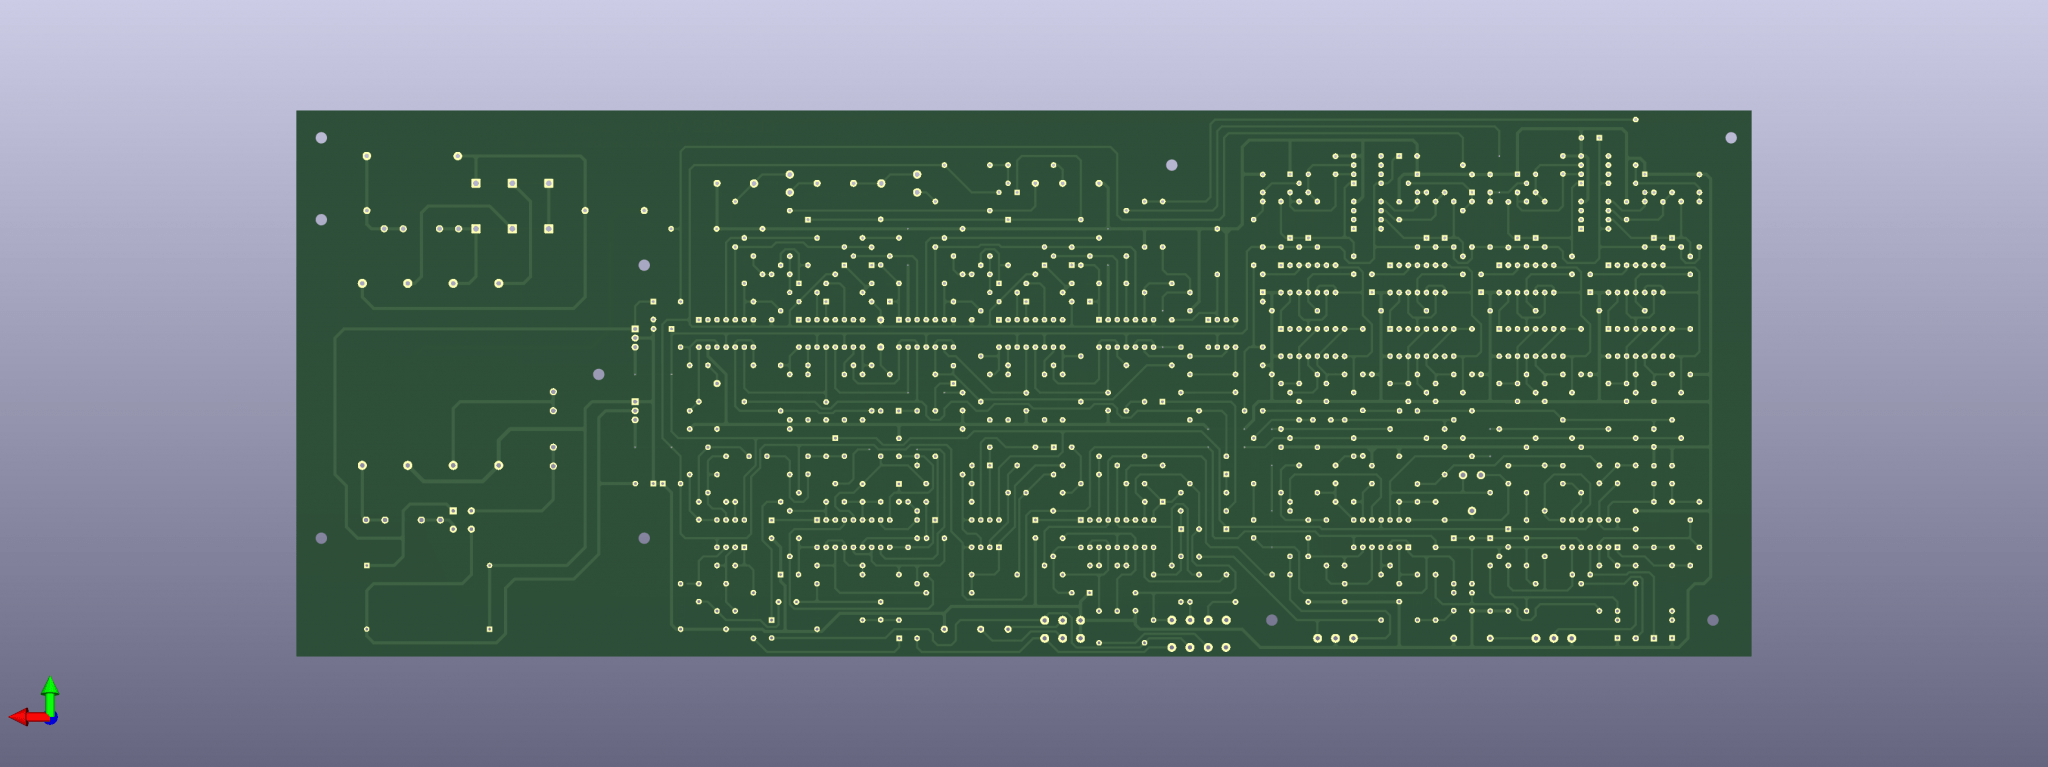 CLS-2022 PCB BOTTOM.png